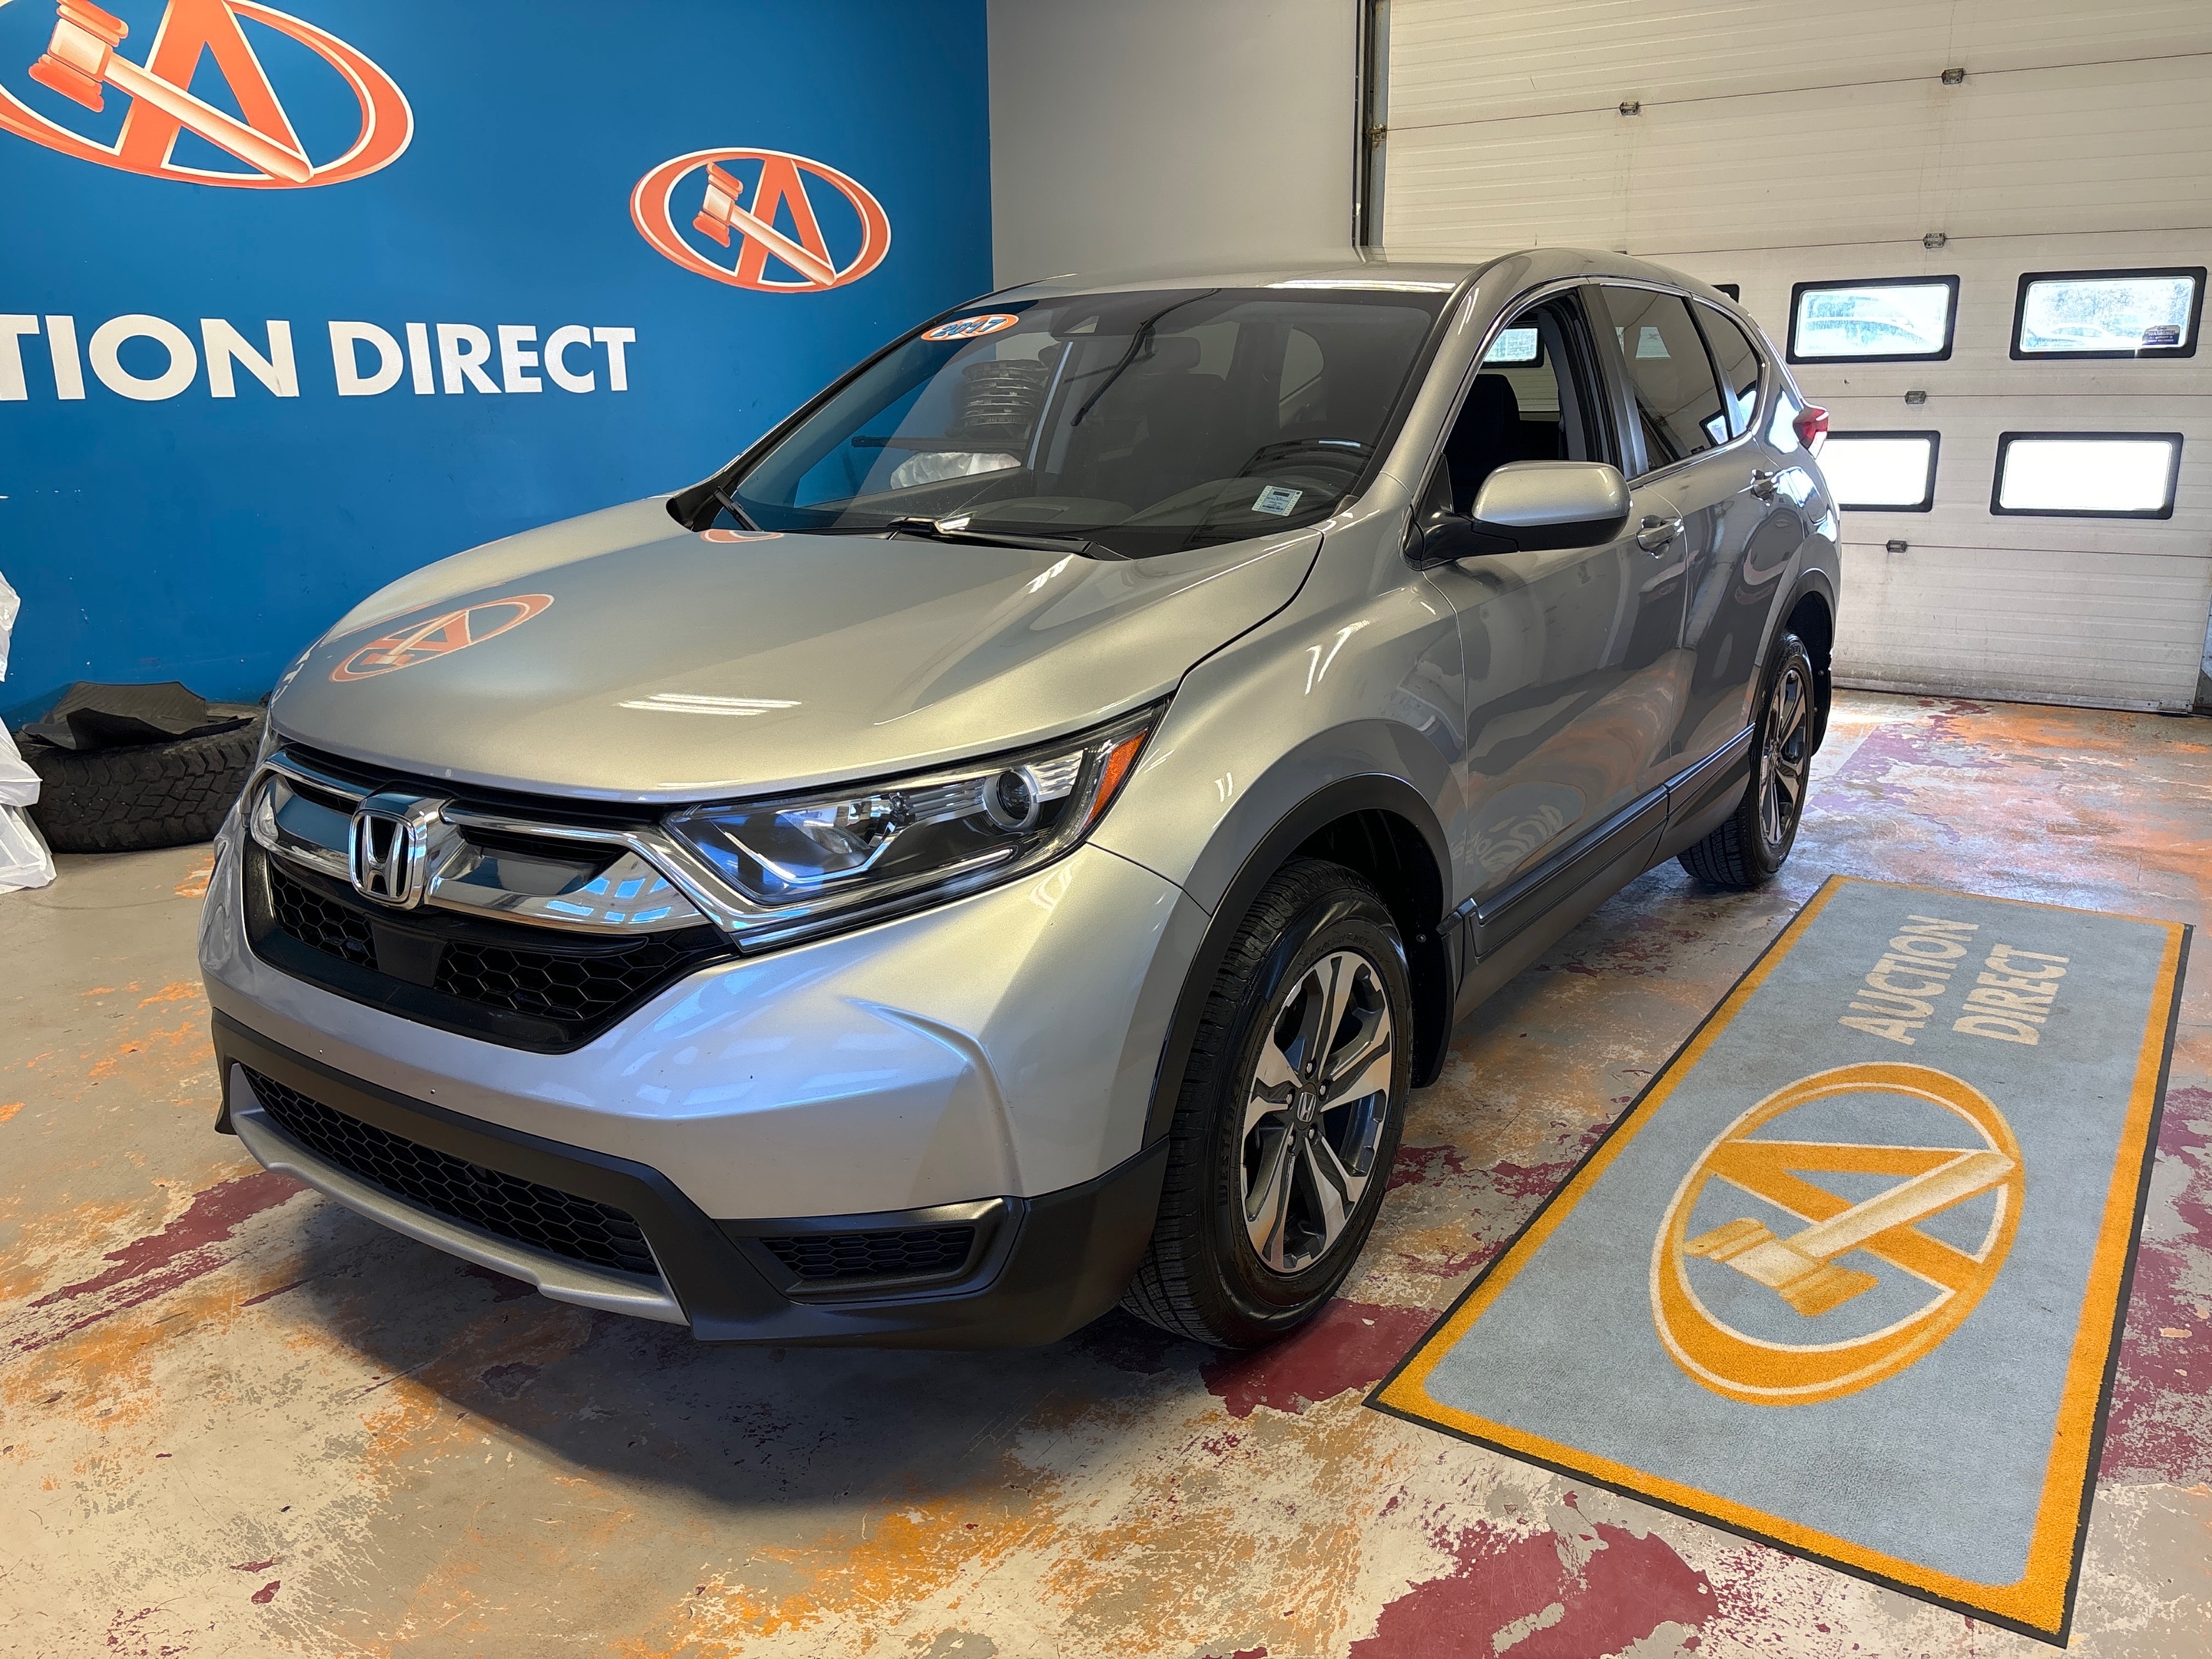 2017 Honda CR-V LX MUST SEE, LOOKS GREAT! DON'T MISS OUT!